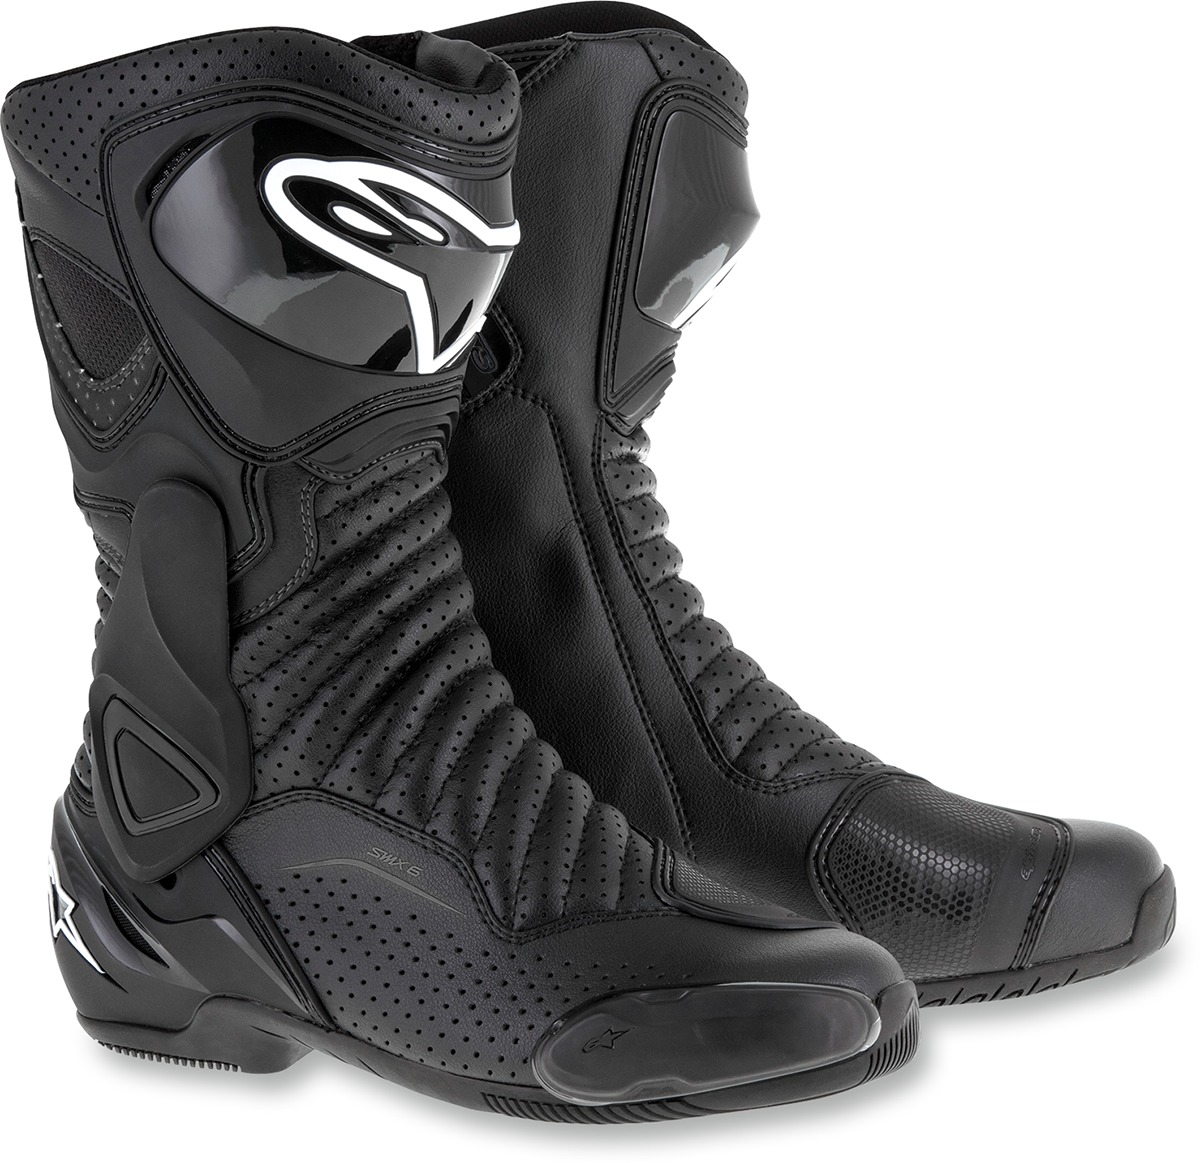 SMX-6v2 Vented Street Riding Boots Black US 12.5 - Click Image to Close